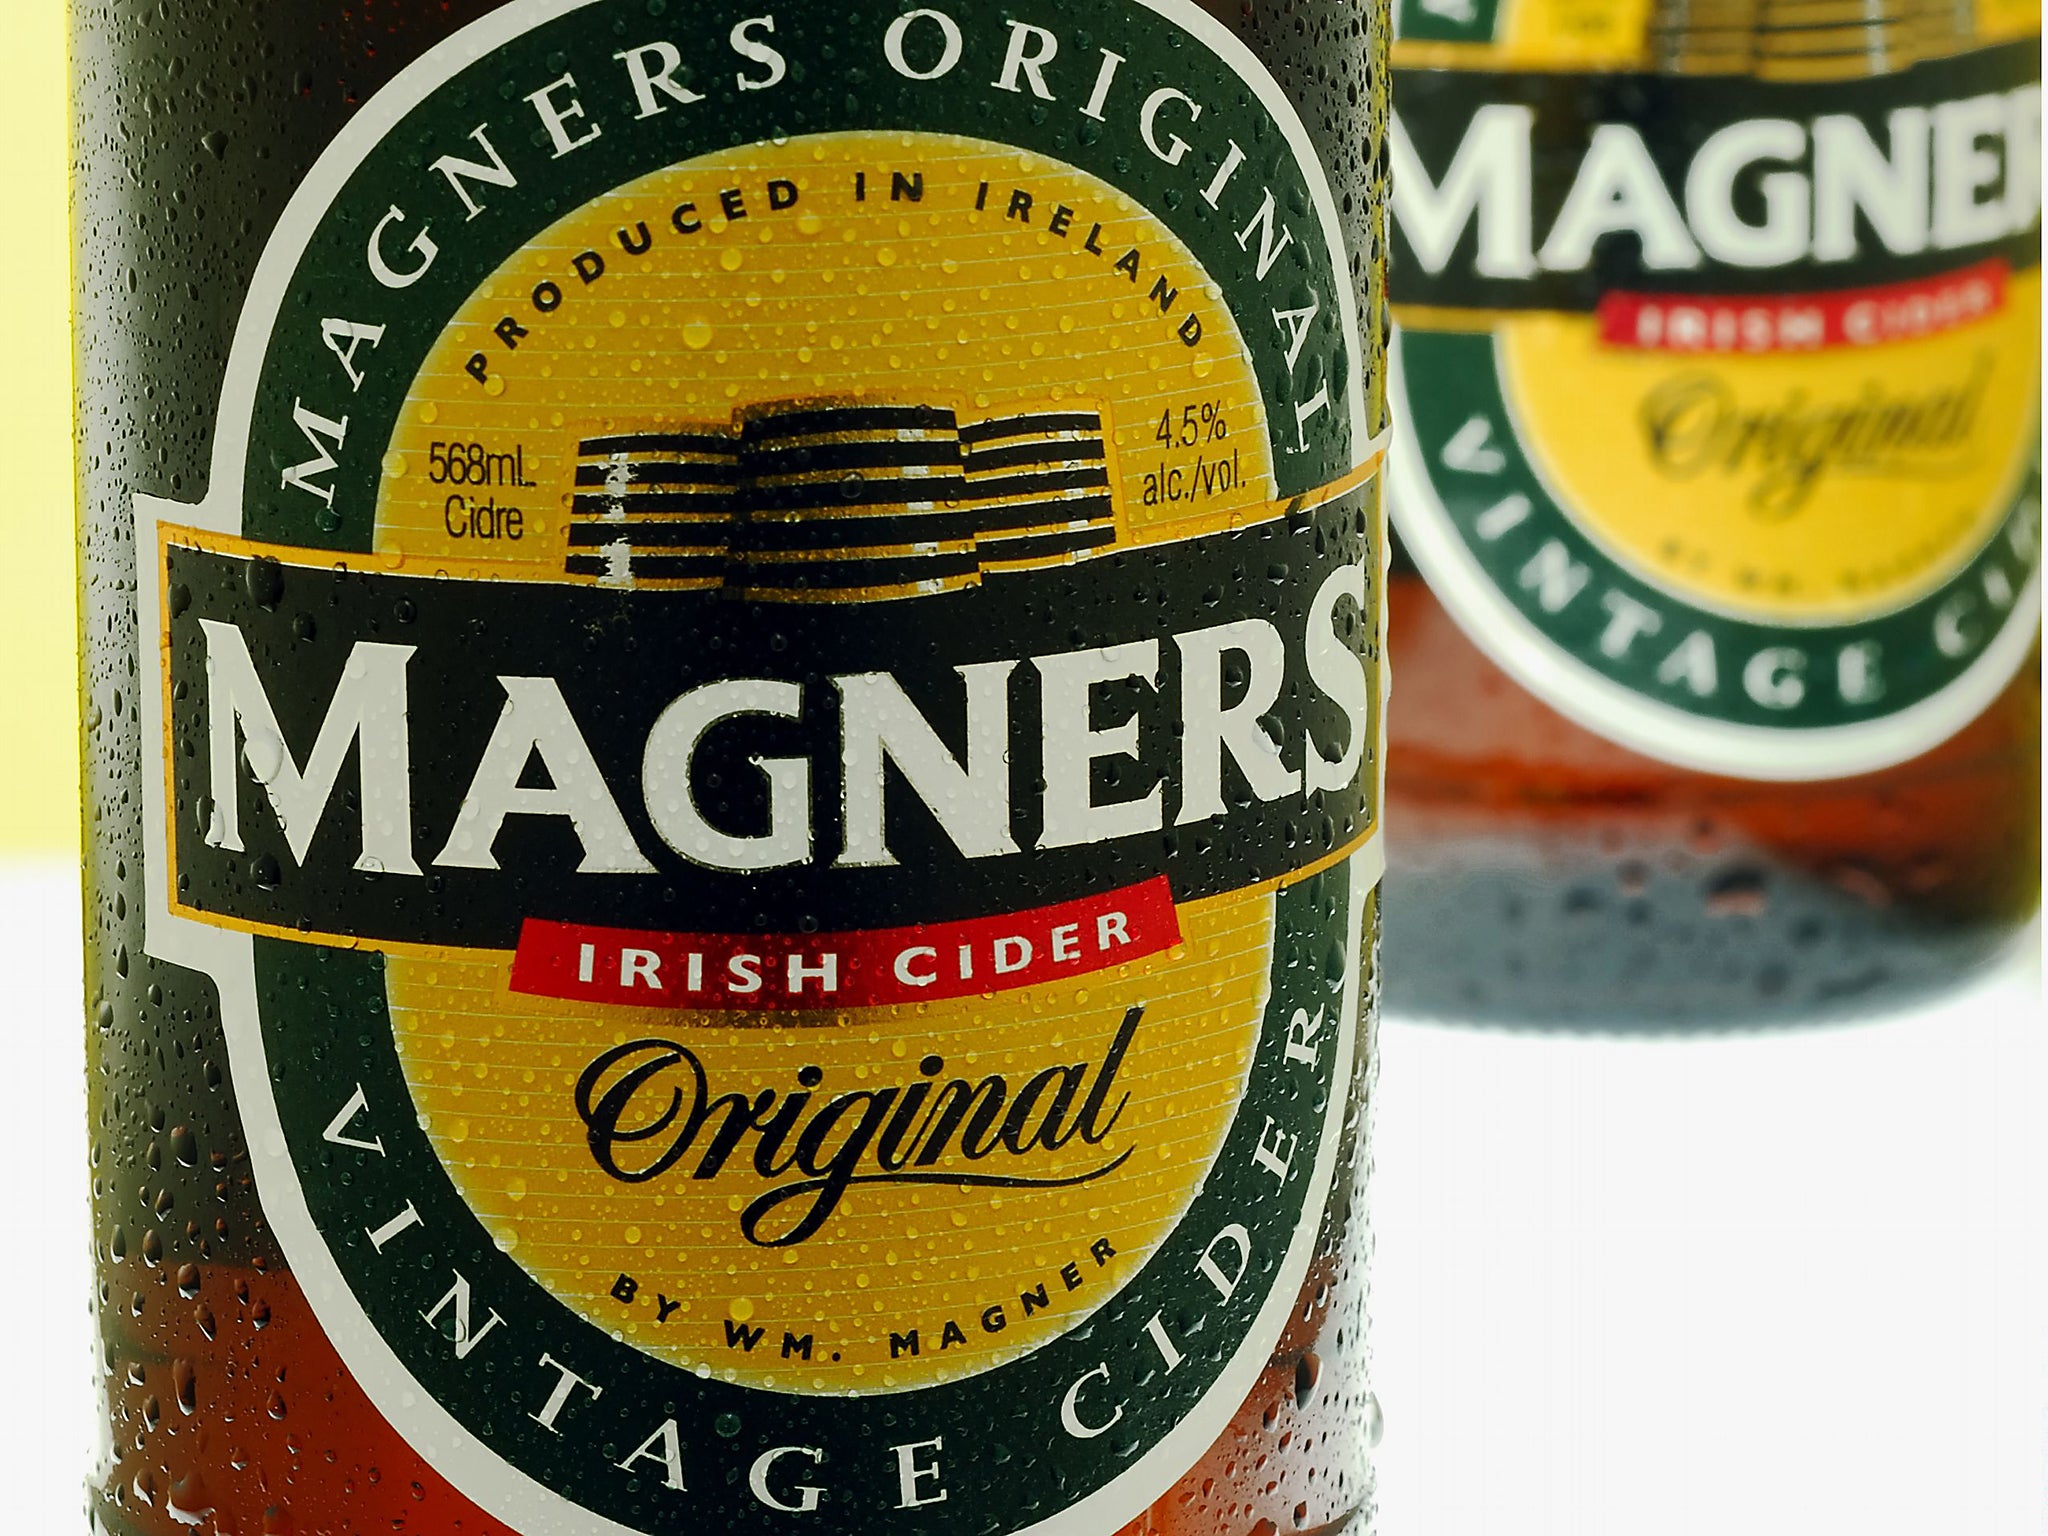 C&C owns Magners as well as the Bulmers and Tennent’s brands